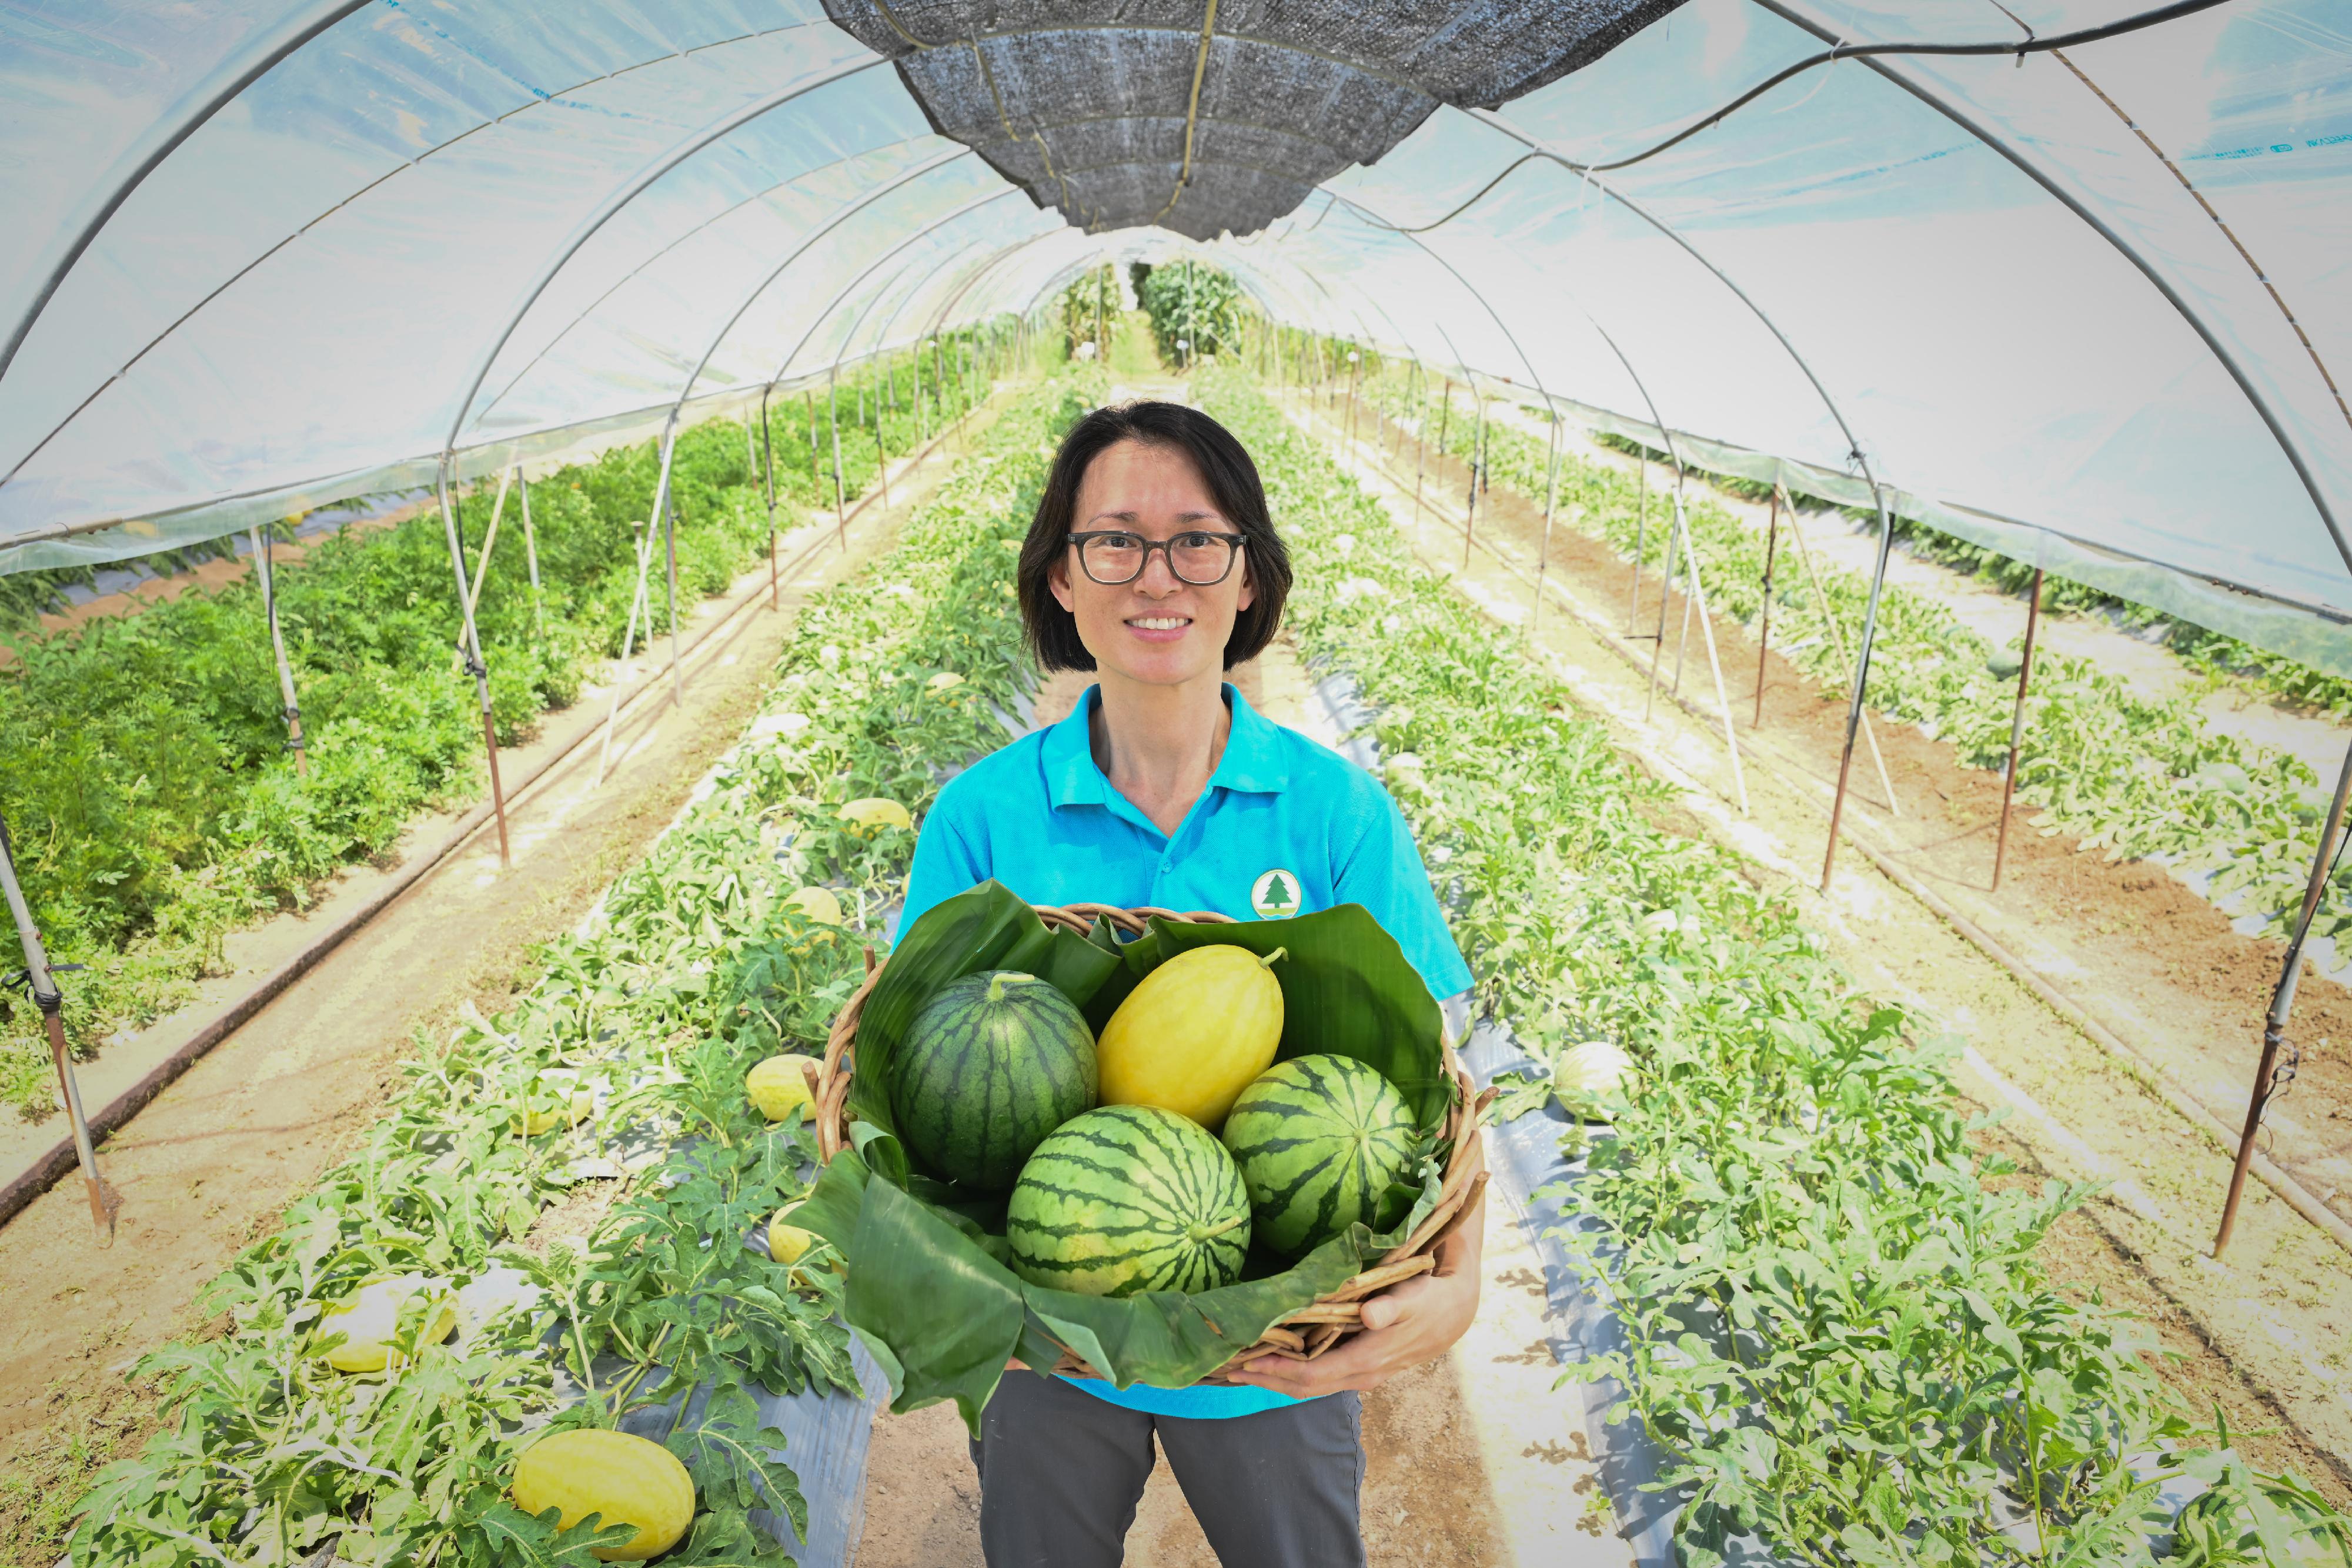 The Agriculture, Fisheries and Conservation Department (AFCD) will hold the Local Organic Watermelon Festival 2023, which is the first event of the Happy Hong Kong - A and F Carnival, from June 22. The AFCD today (June 19) introduced four highlighted varieties of organic watermelons for the occasion. Photo shows AFCD Agricultural Officer (Horticulture) Ms Wong Mun-wai introducing the highlighted varieties of watermelons as part of the department's promotion of environmentally friendly cultivation practices through organic farming.